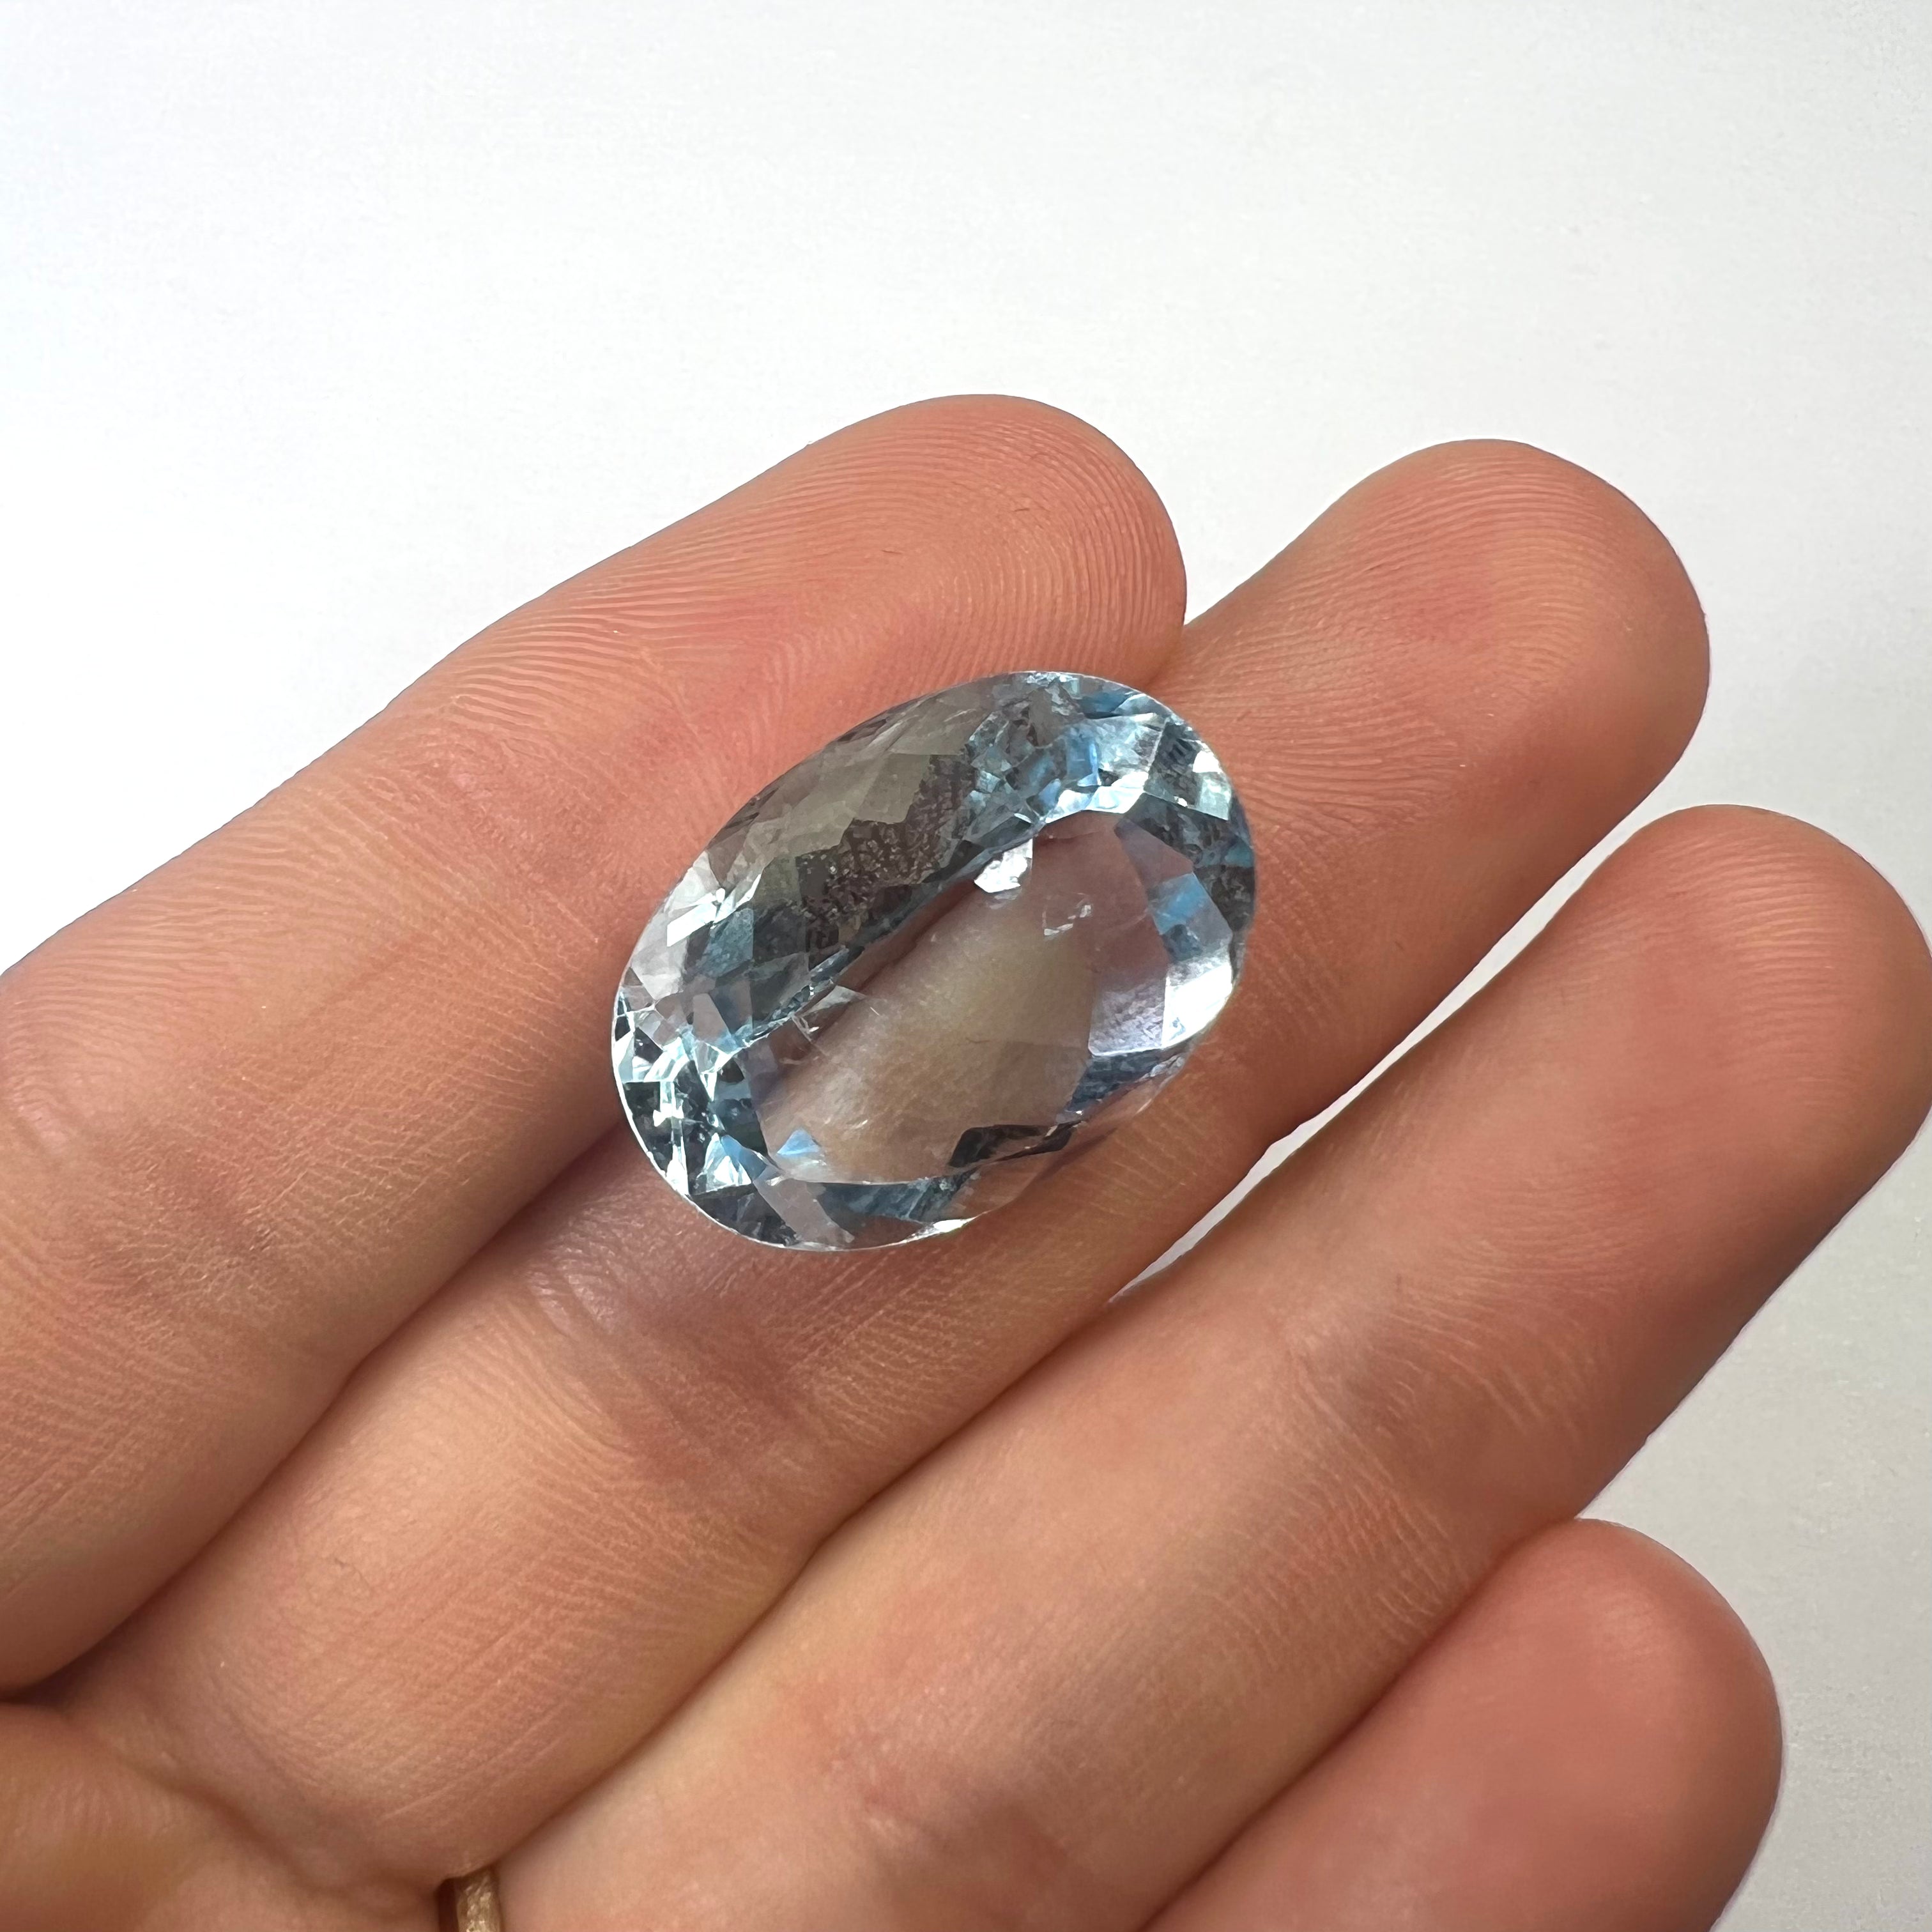 23.43CTW Loose Natural Oval Cut Topaz 21x15x9mm Earth mined Gemstone